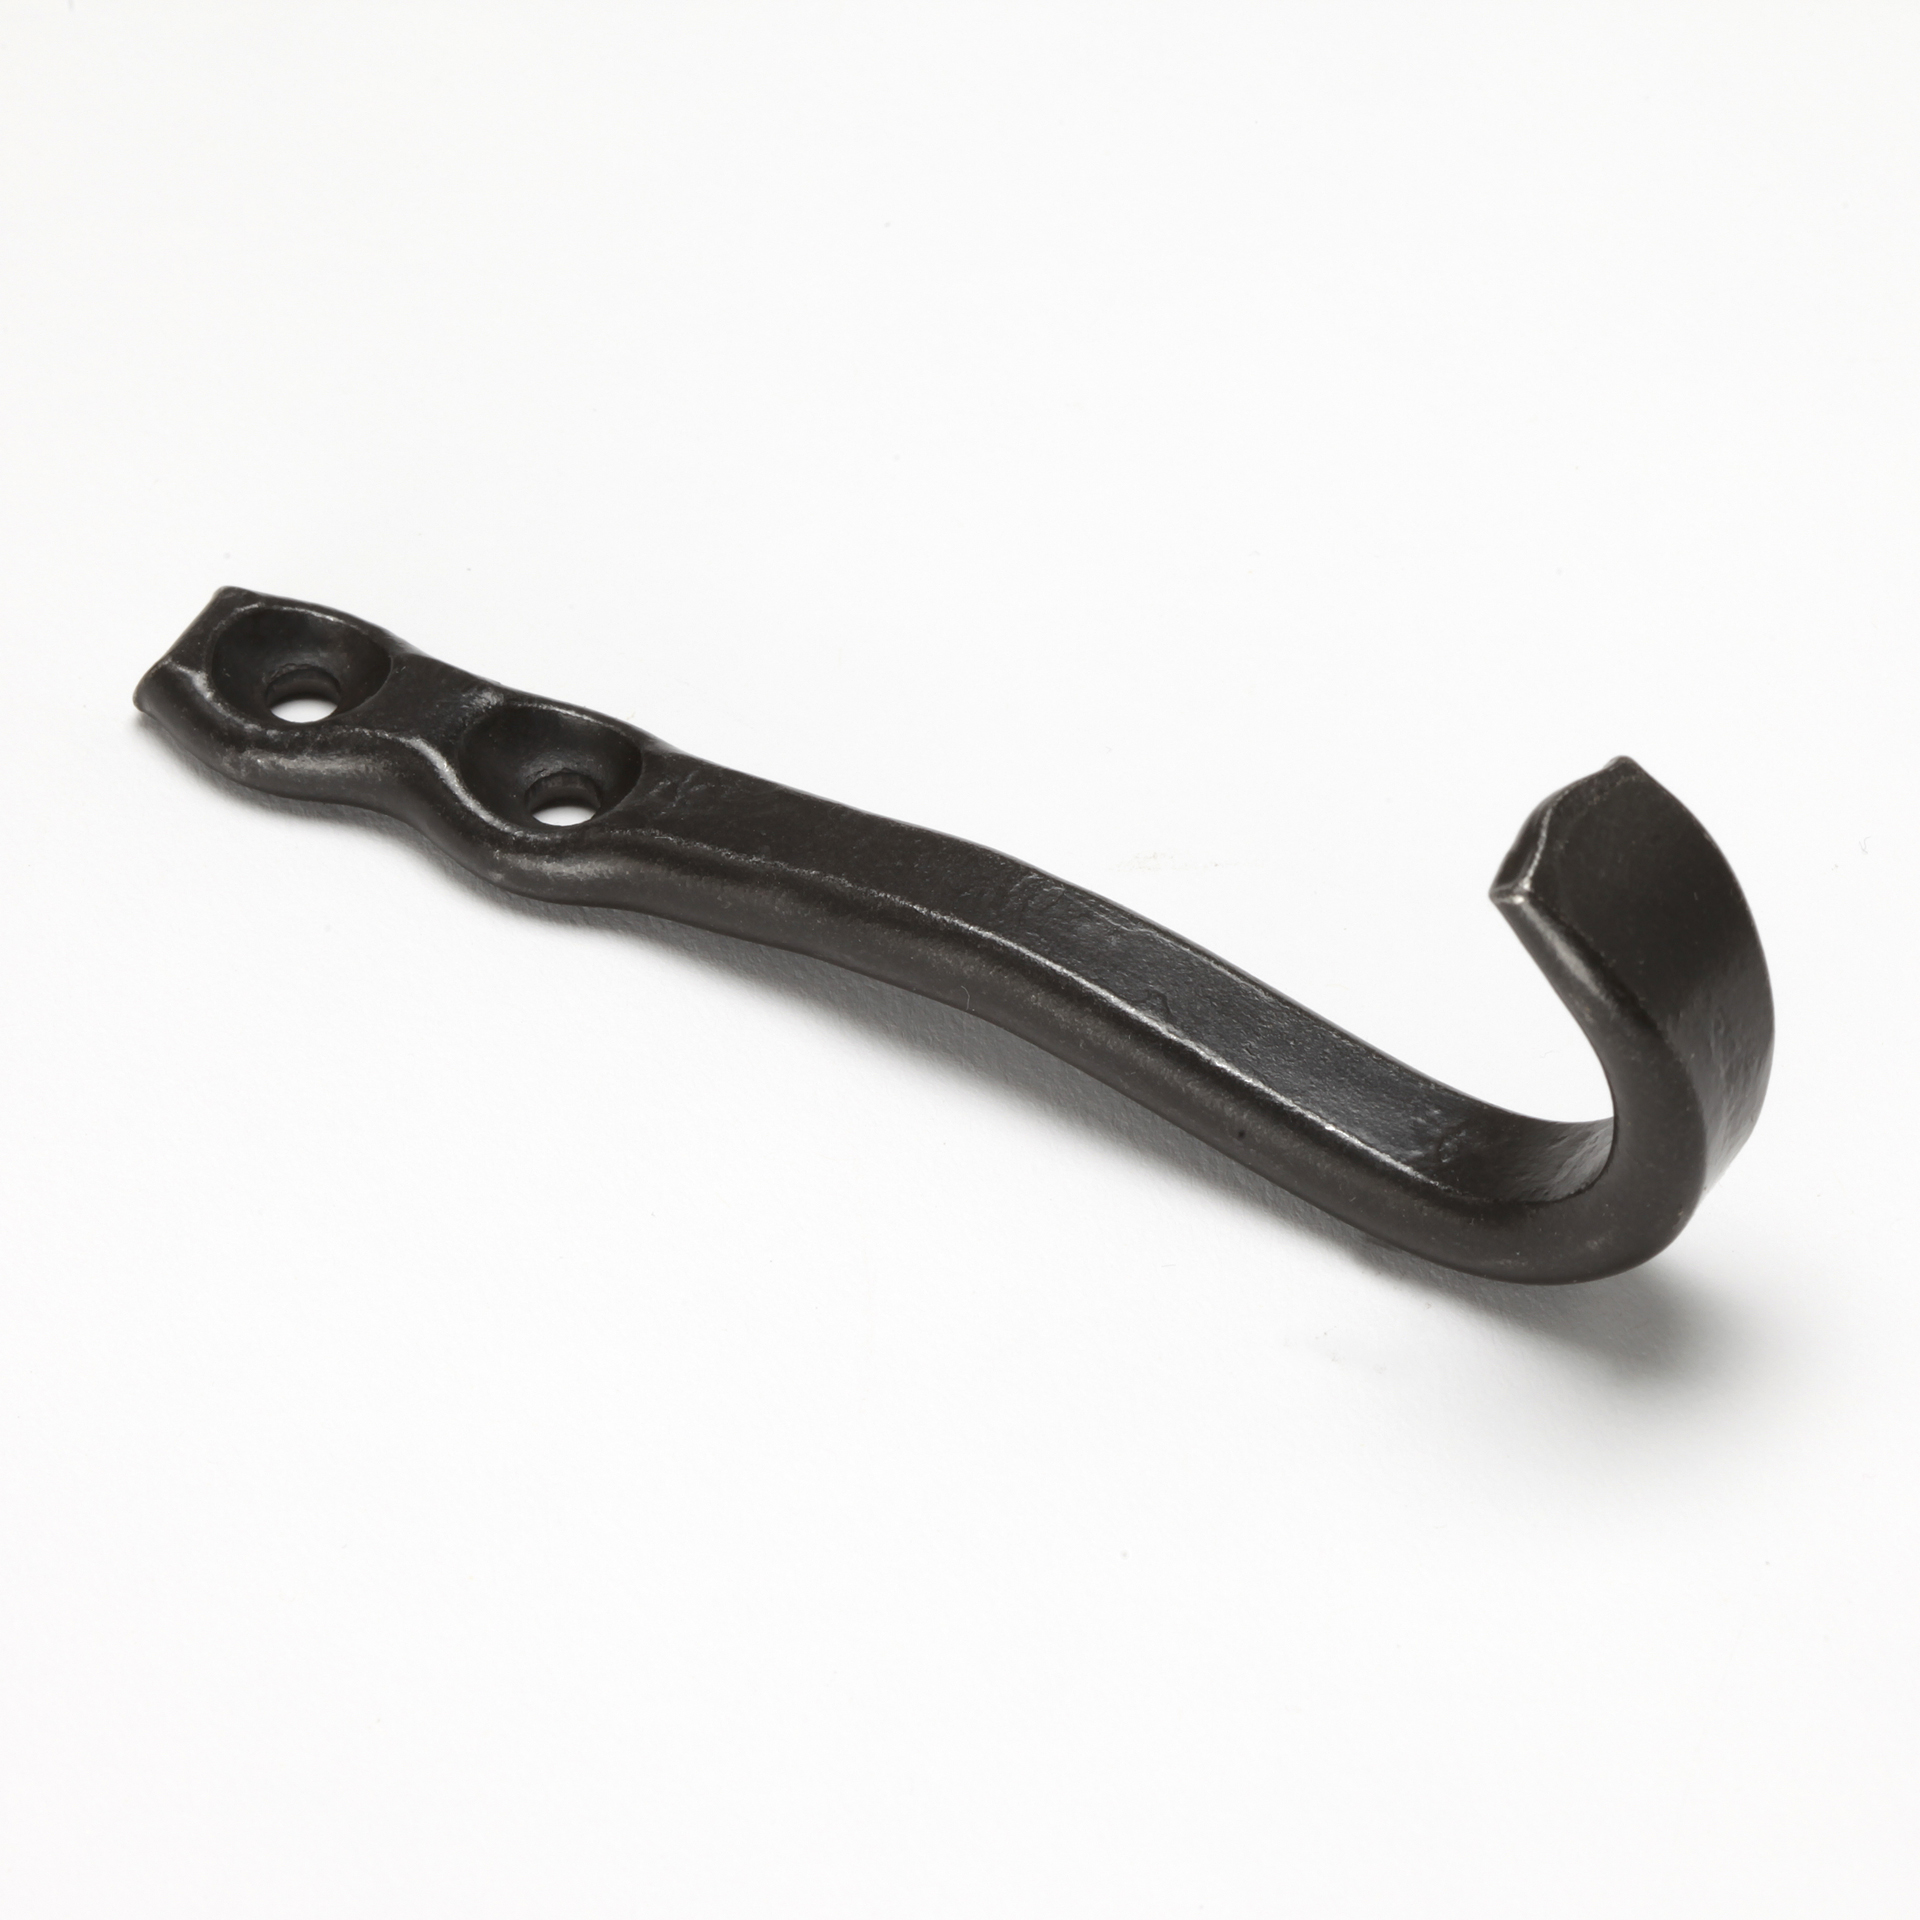 Forged Wrought Iron Wall Hook / Key Hook 1211 - Northern Crescent Iron